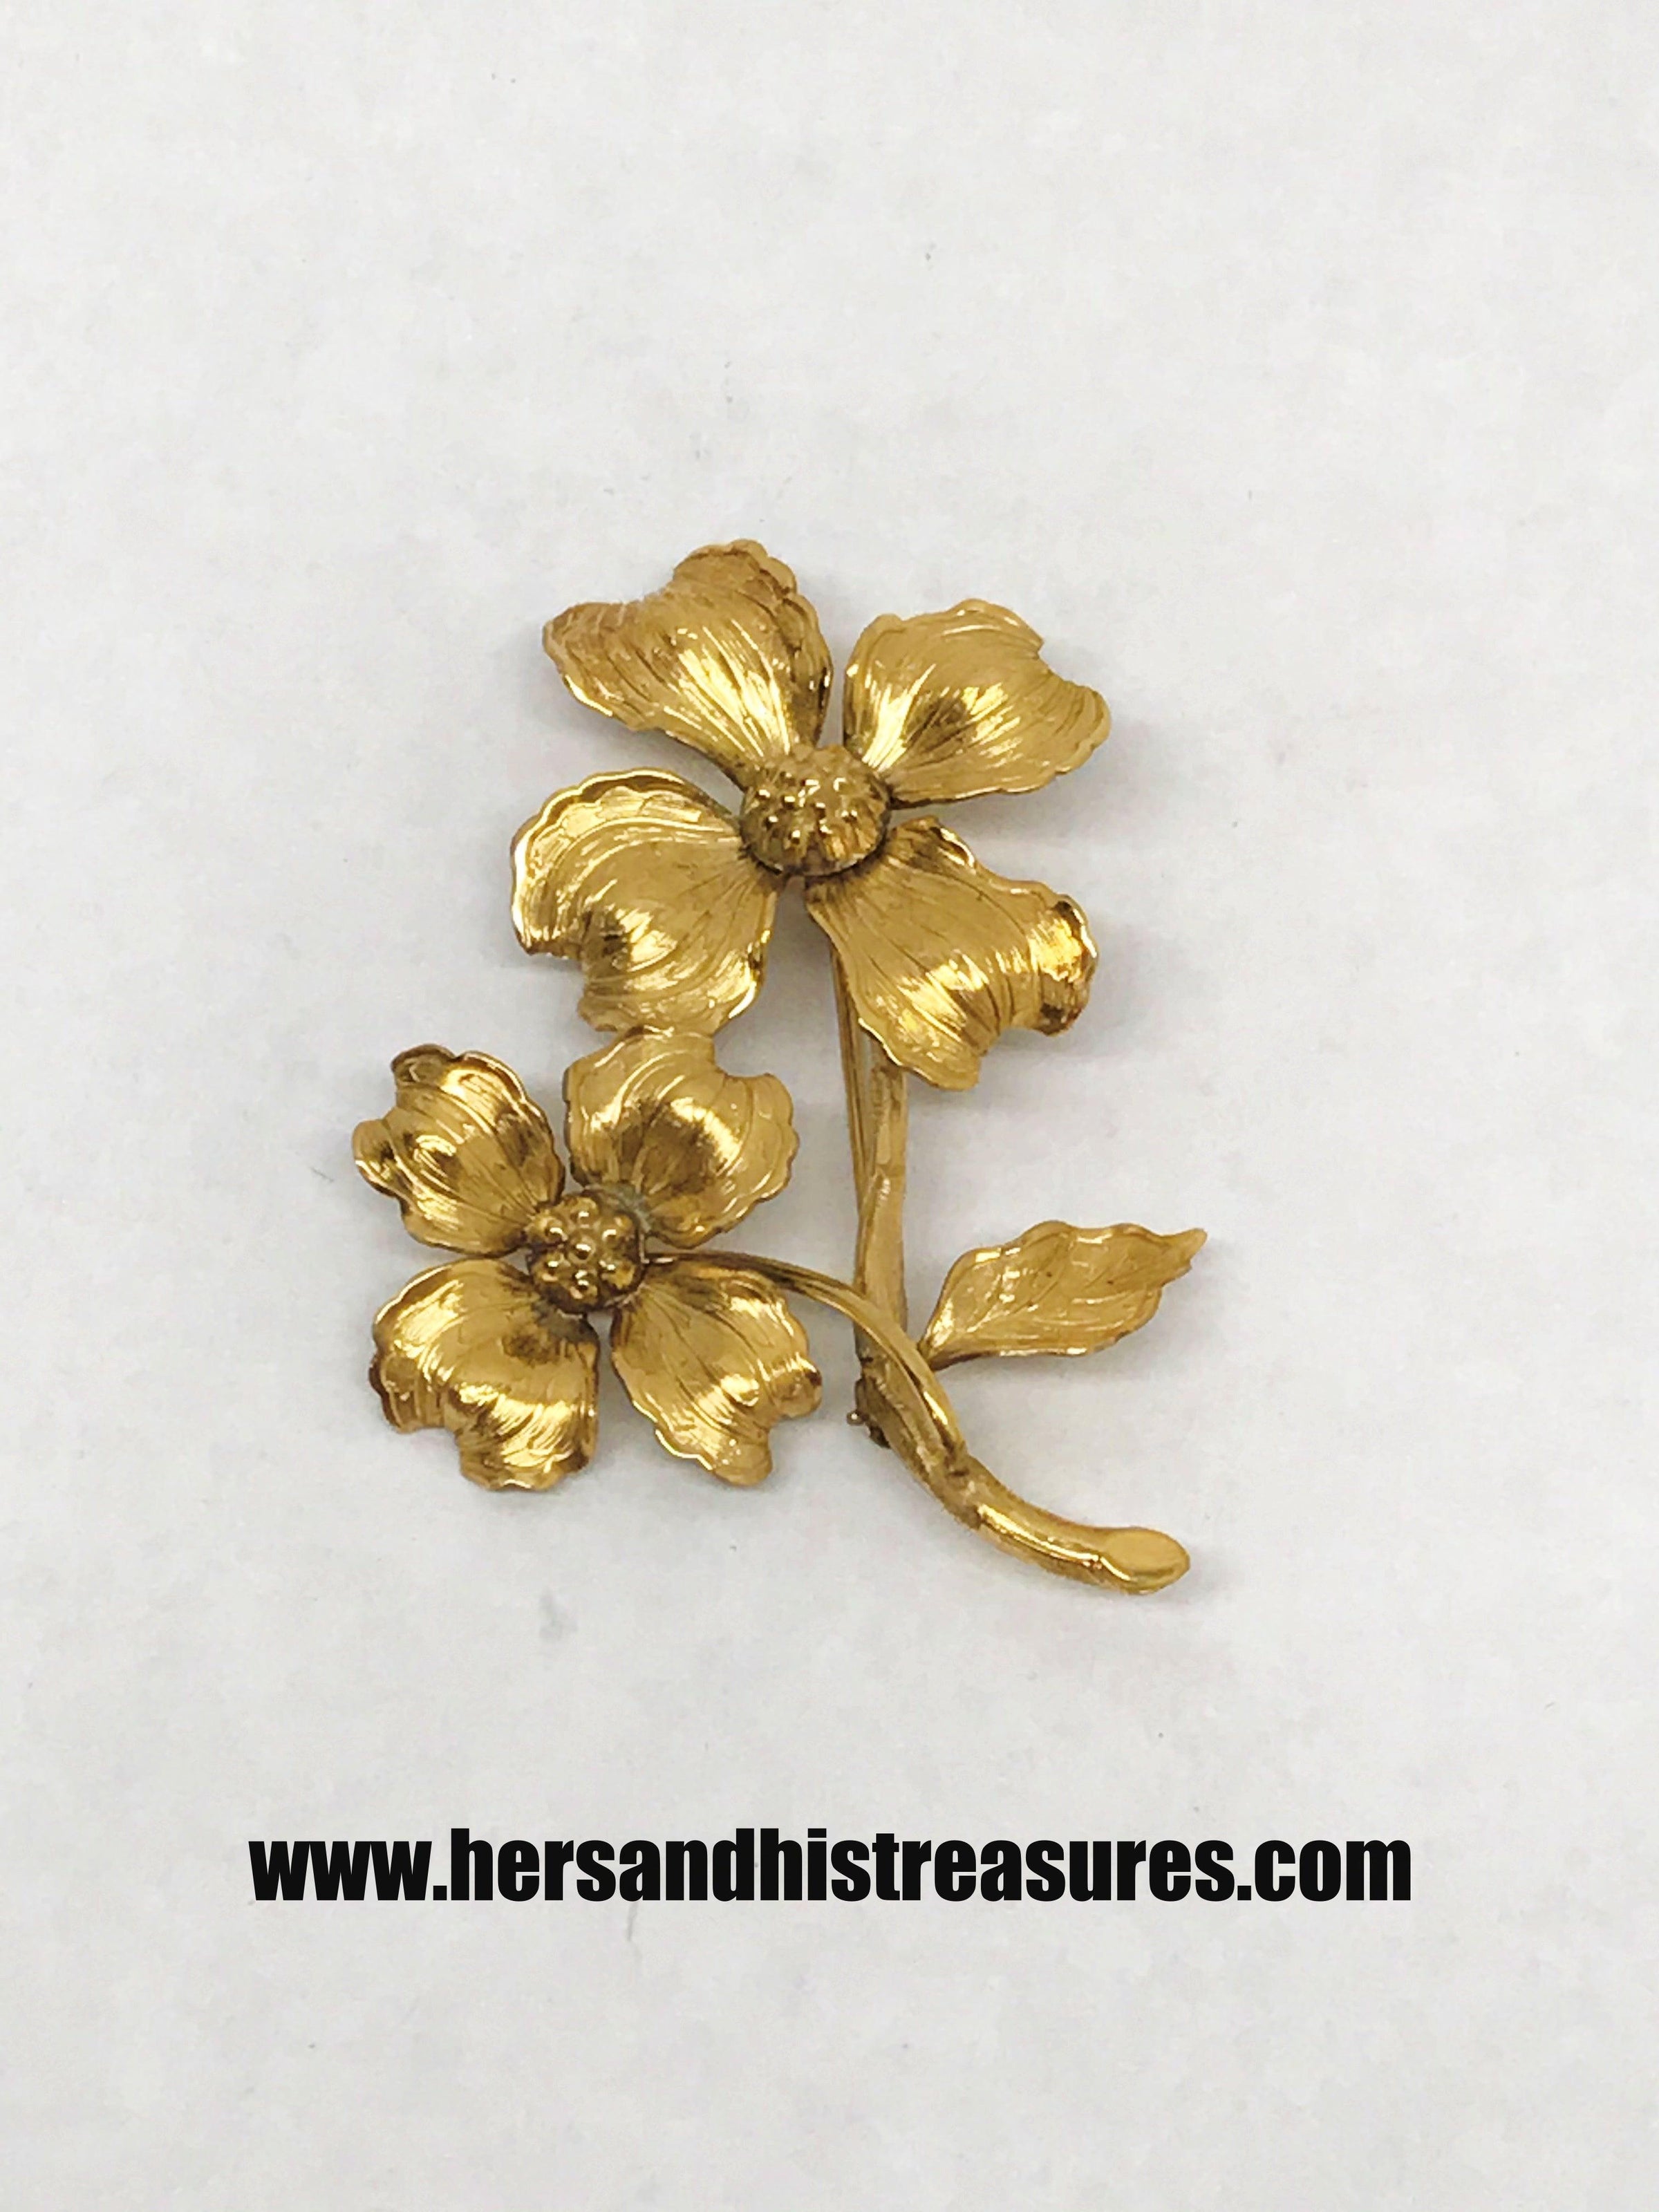 Vintage 1/20 12K Gold Filled Flower Brooch Pin - Hers and His Treasures